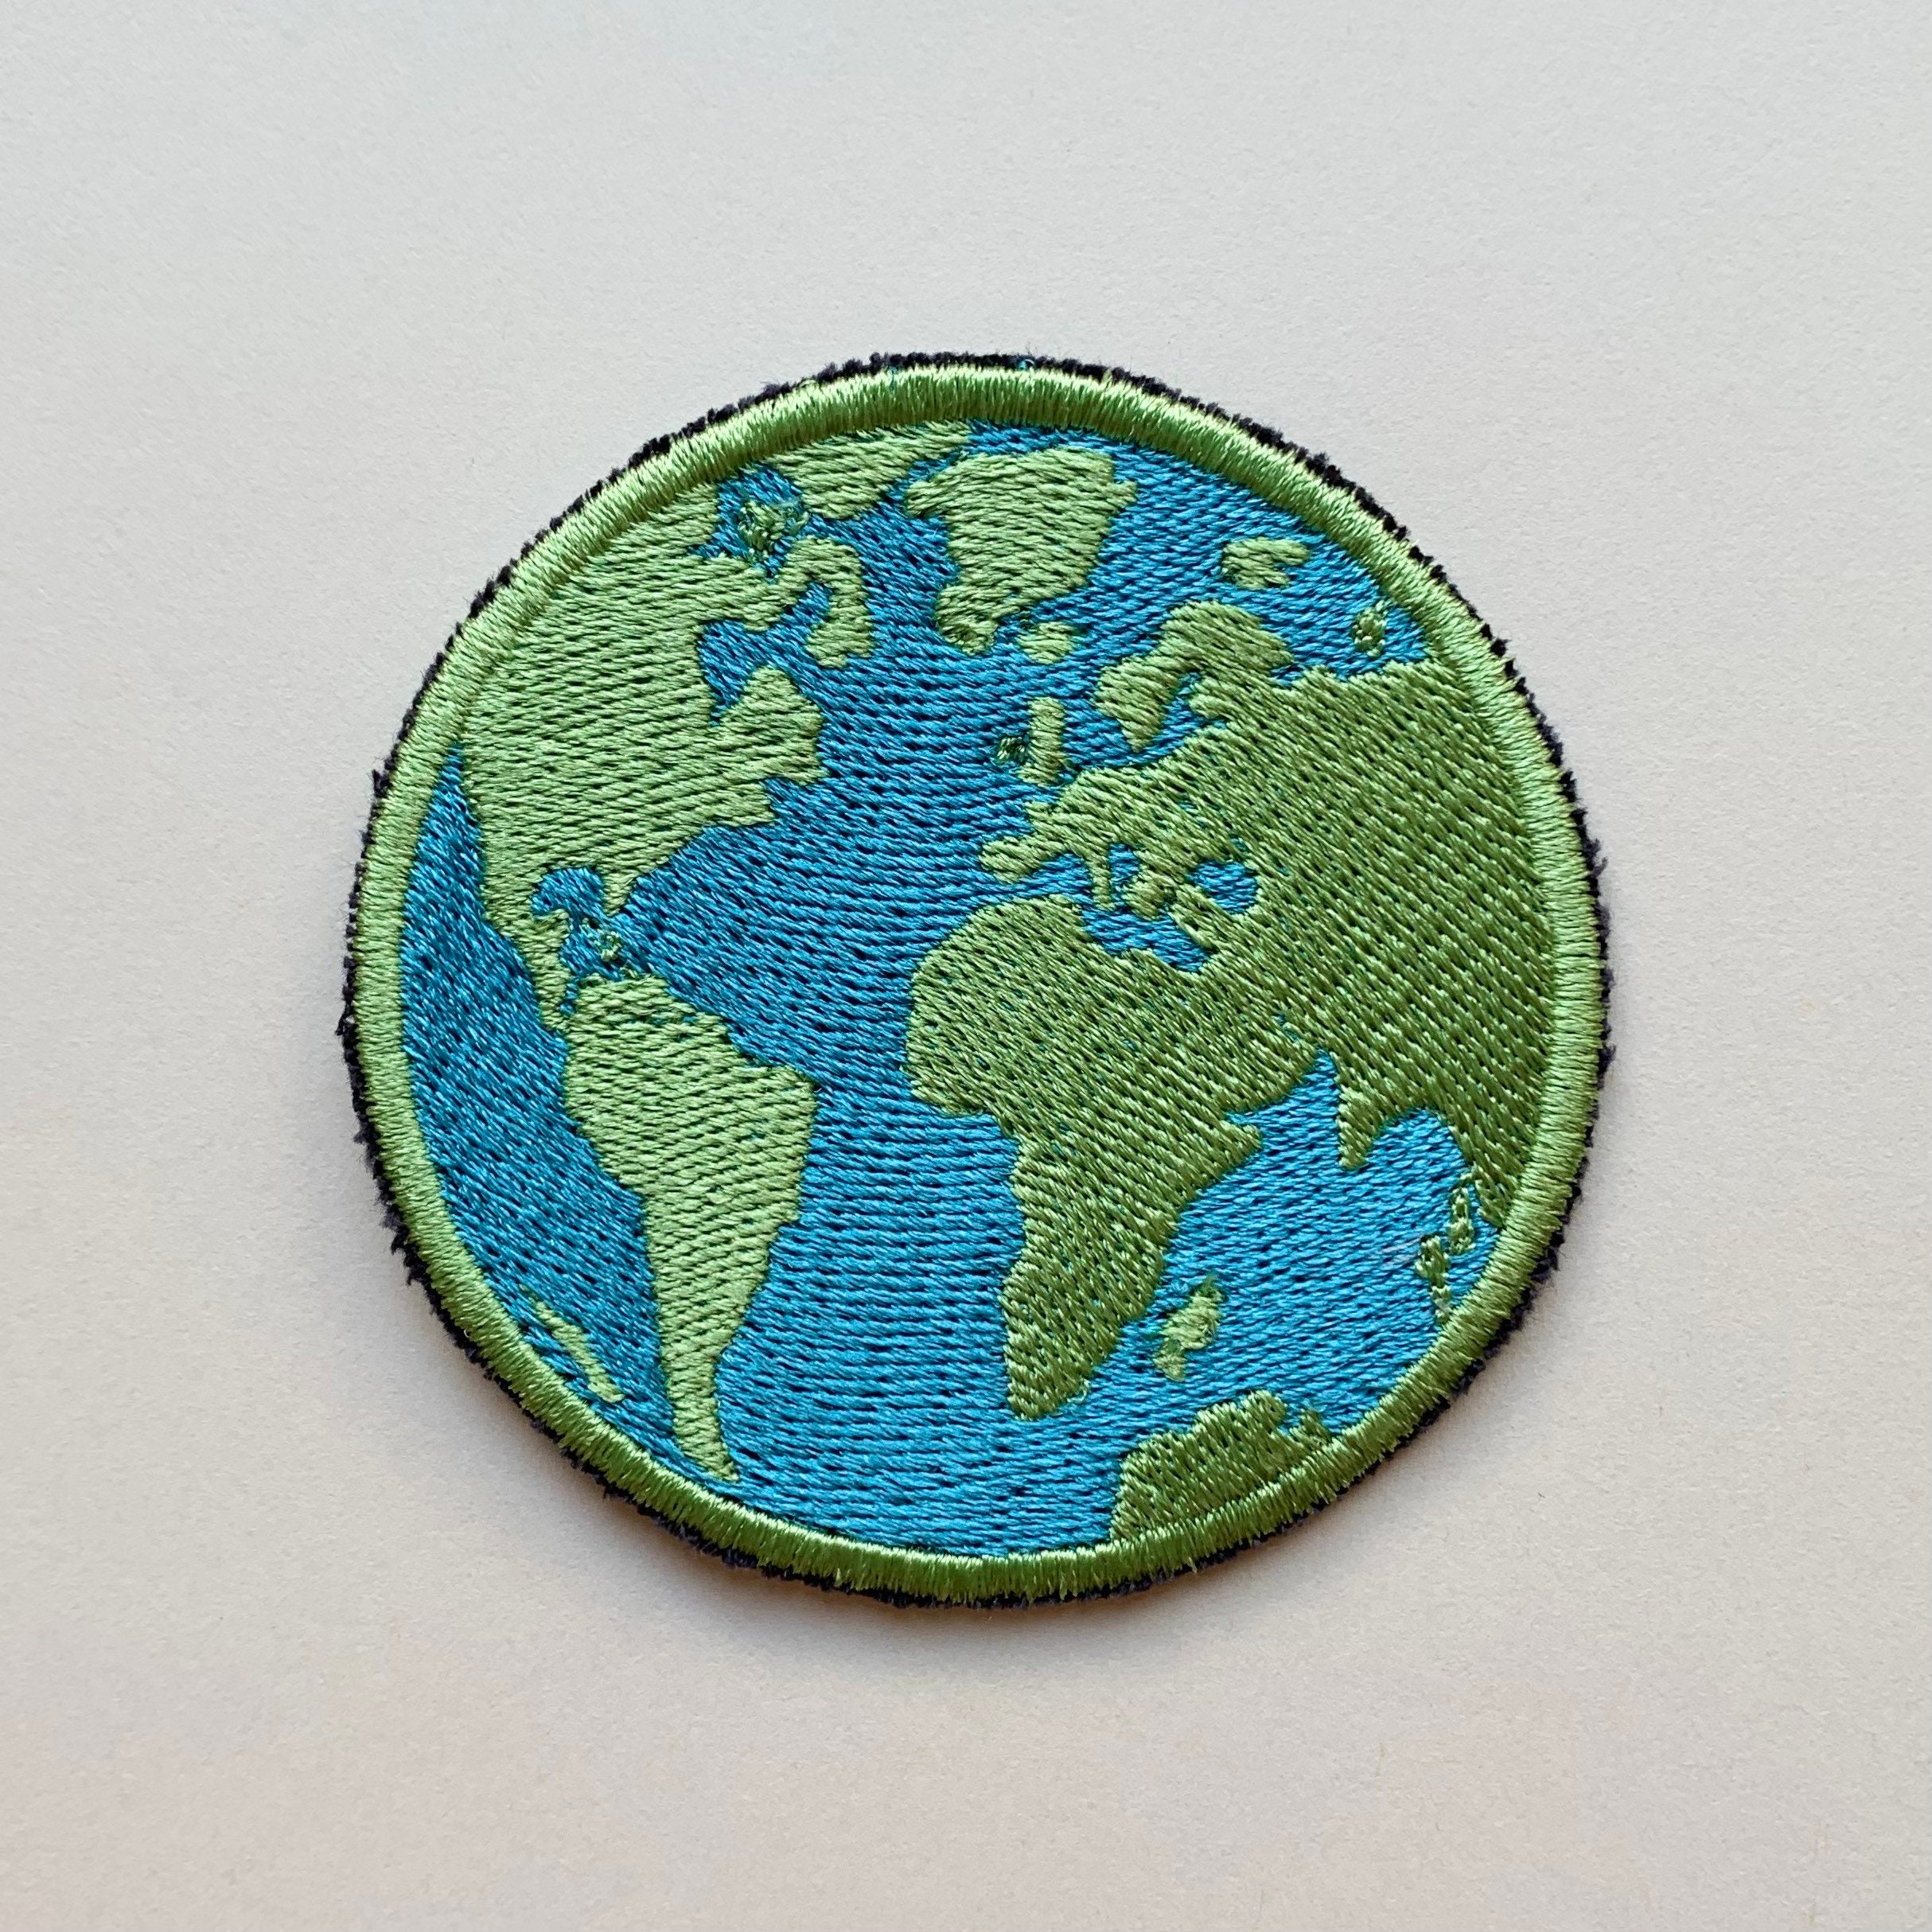 Patch Planet Earth Patch Embroidered Bio Application Sign Logo ...